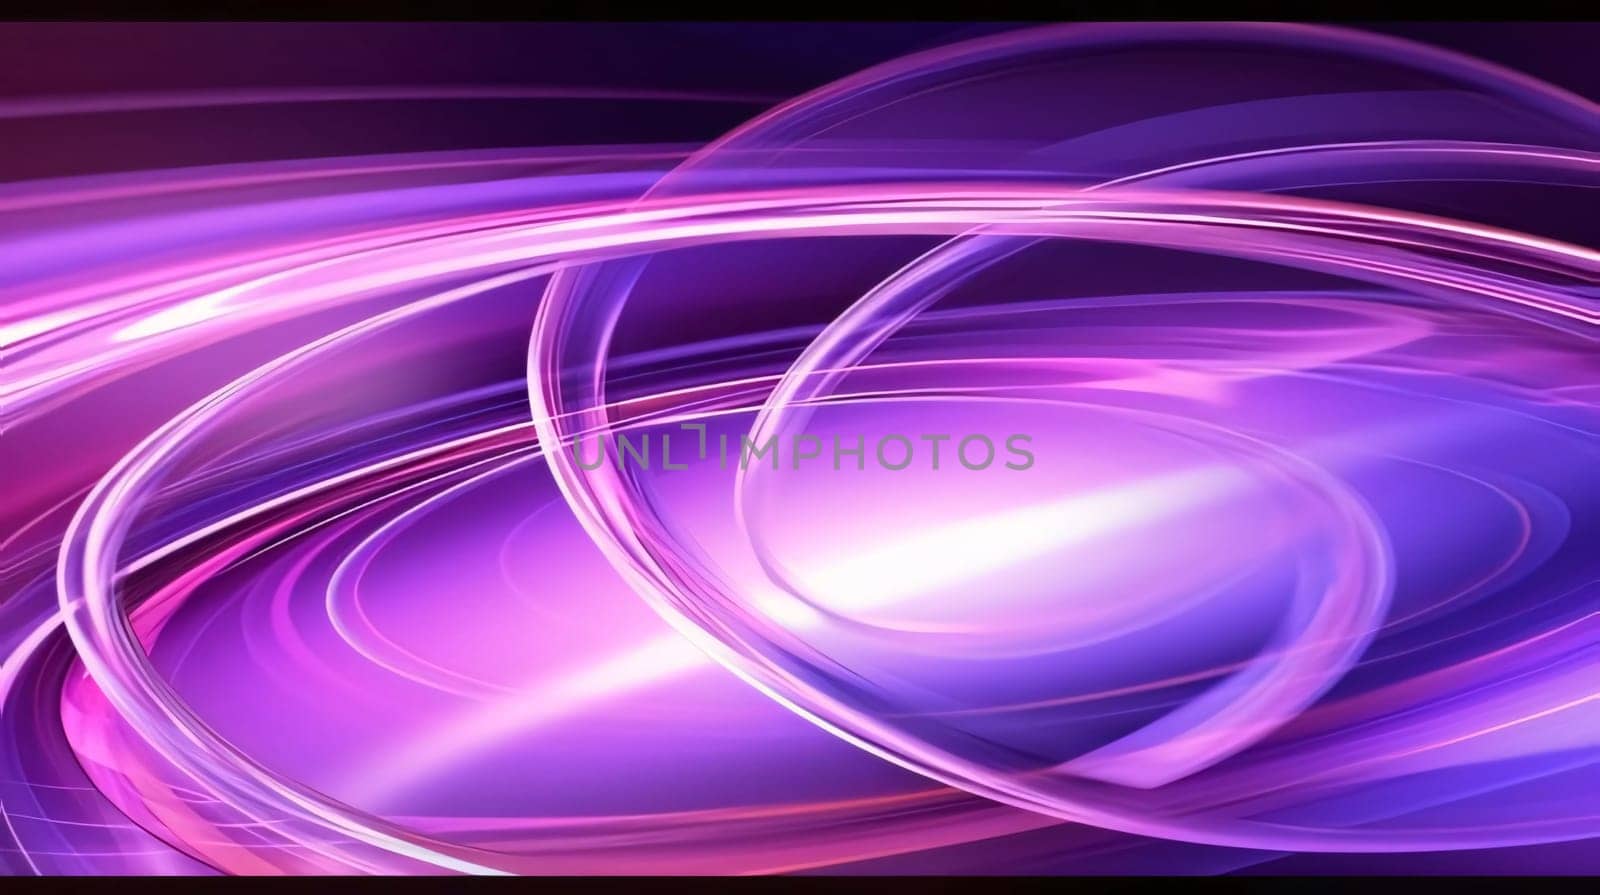 abstract background with smooth lines in purple and violet colors, illustration by ThemesS